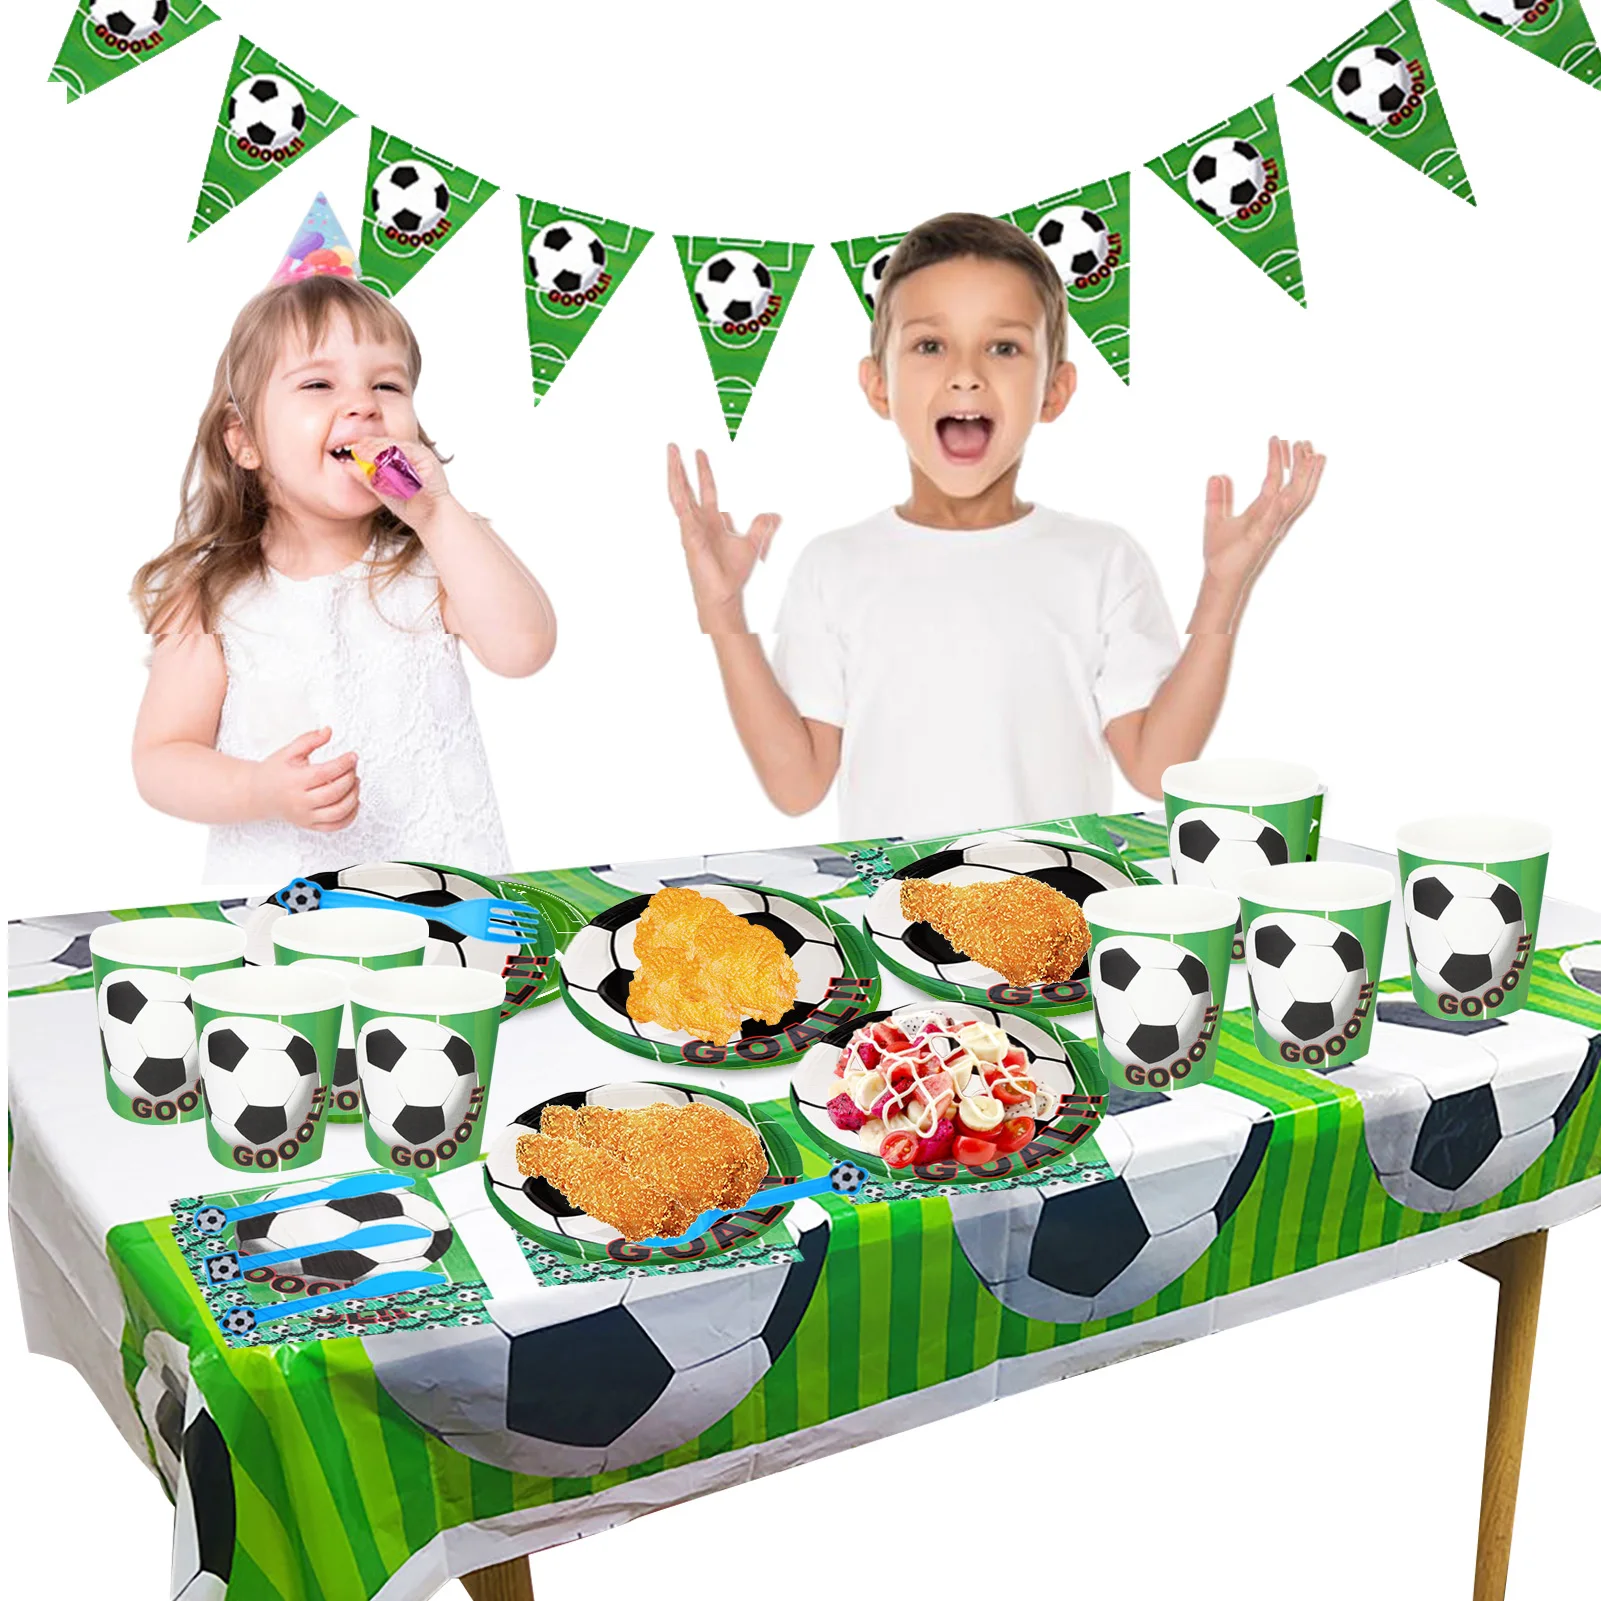 

Football Themed Party Supplies And Decorations Decorations For 25 Guests Included Triangle Flag Table Cover Plates Napkins Cups